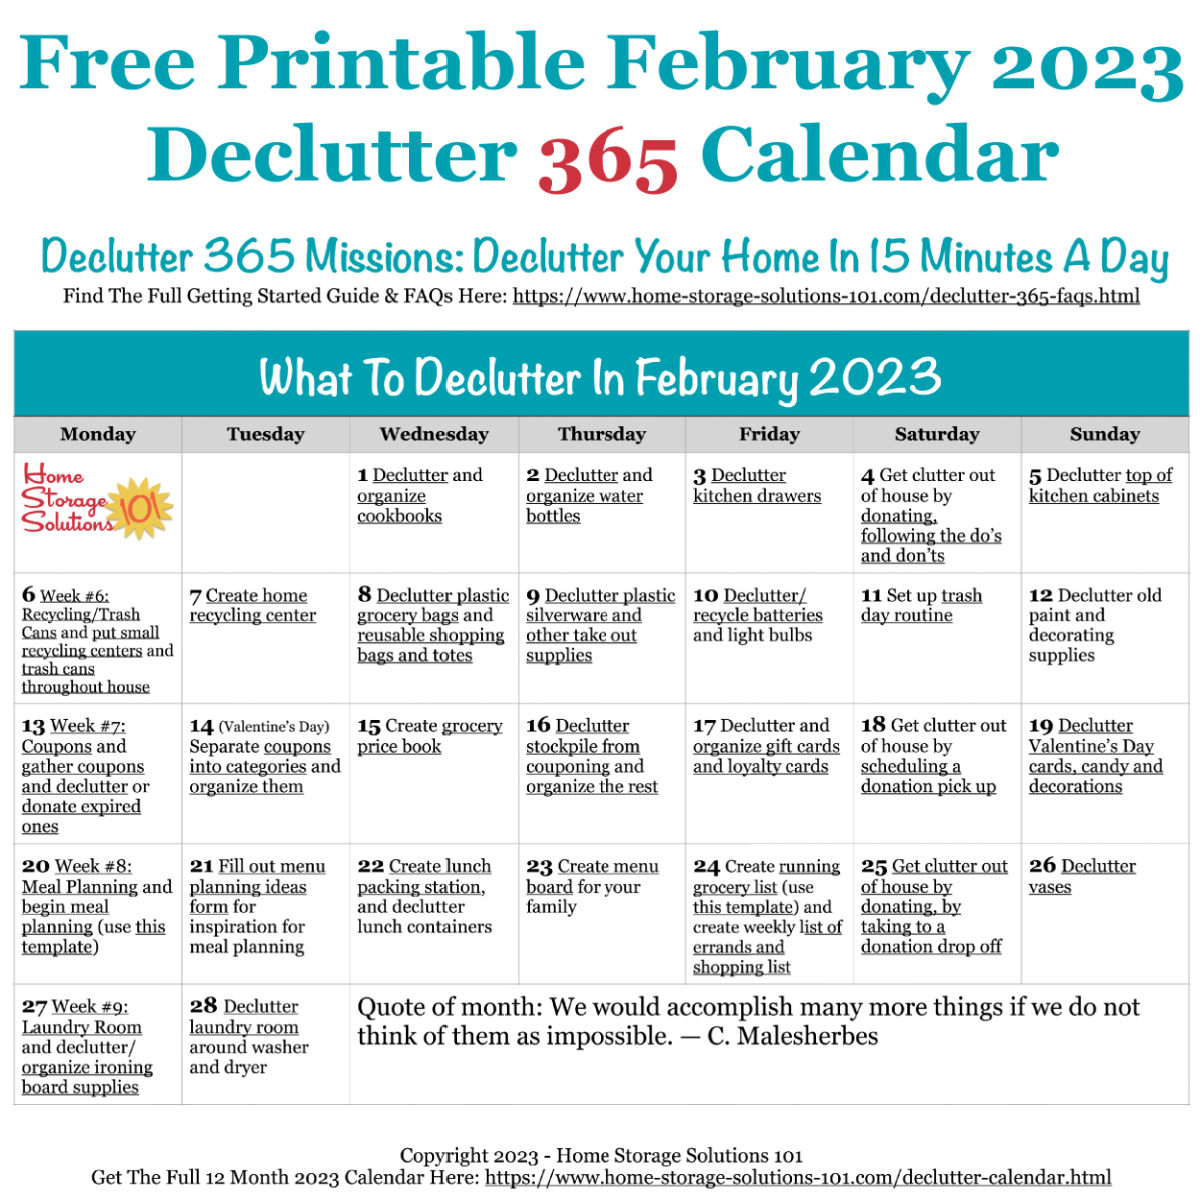 February Declutter 365 Calendar 15 Minute Daily Missions For Month